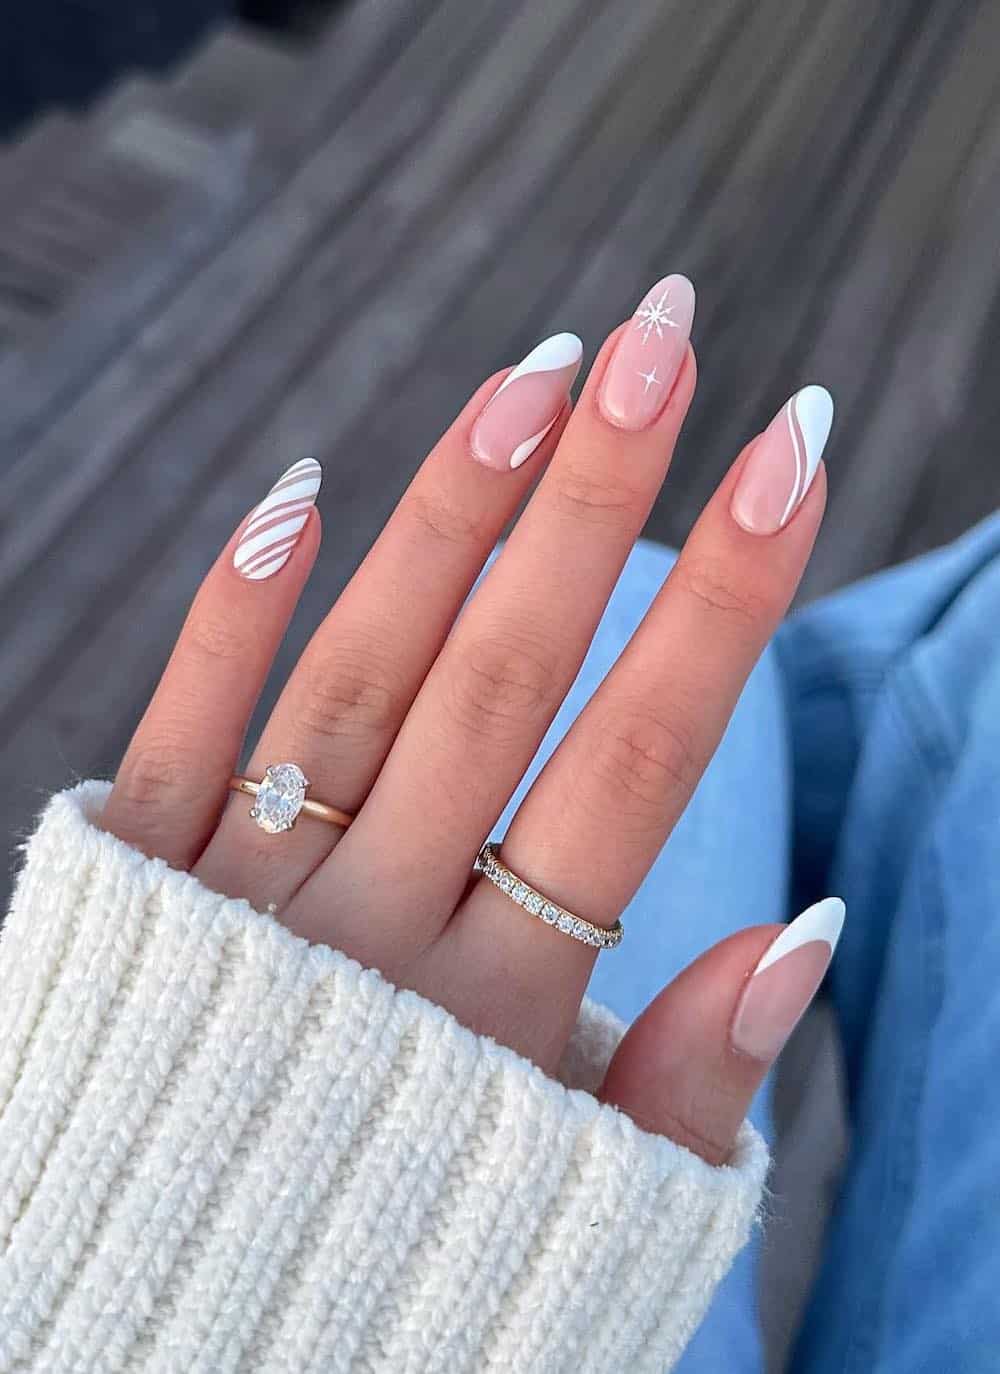 nude pink almond nails with white swirls, stripes, snowflakes, and tips